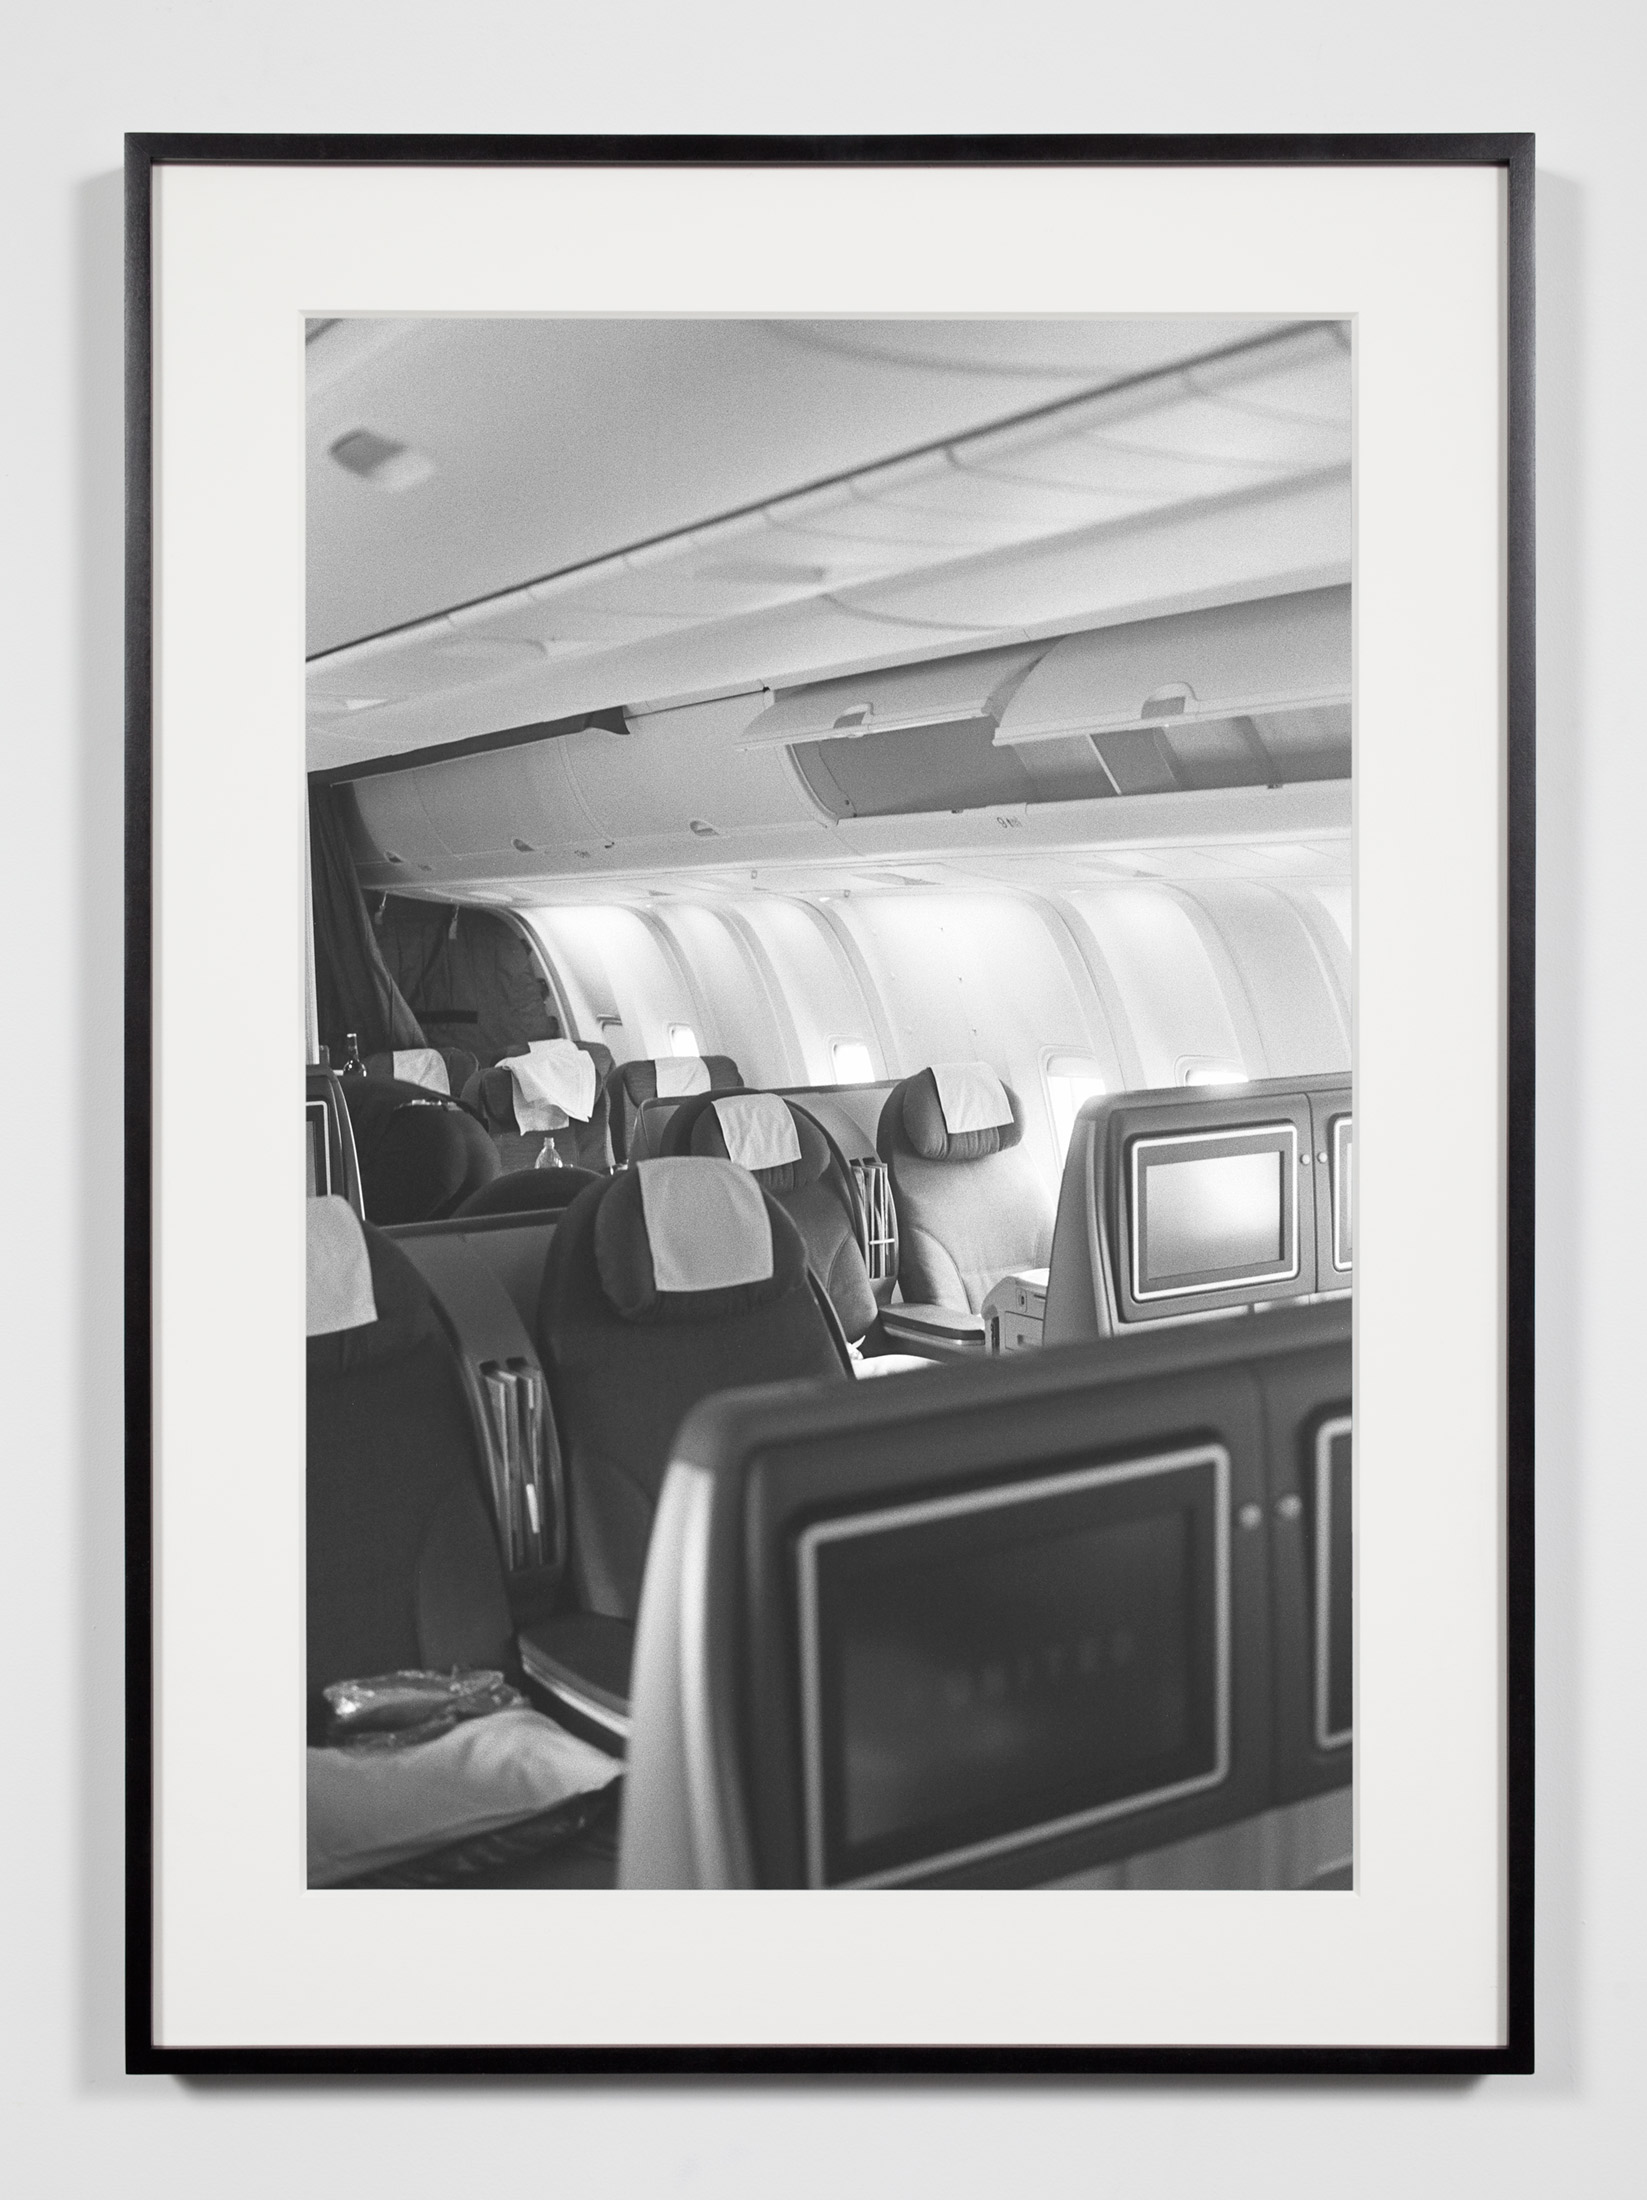   Business Class Cabin, Moscow, Russia, May 17, 2009   2011  Epson Ultrachrome K3 archival ink jet print on Hahnemühle Photo Rag paper  36 3/8 x 26 3/8 inches   Industrial Portraits, 2008–    A Diagram of Forces, 2011     